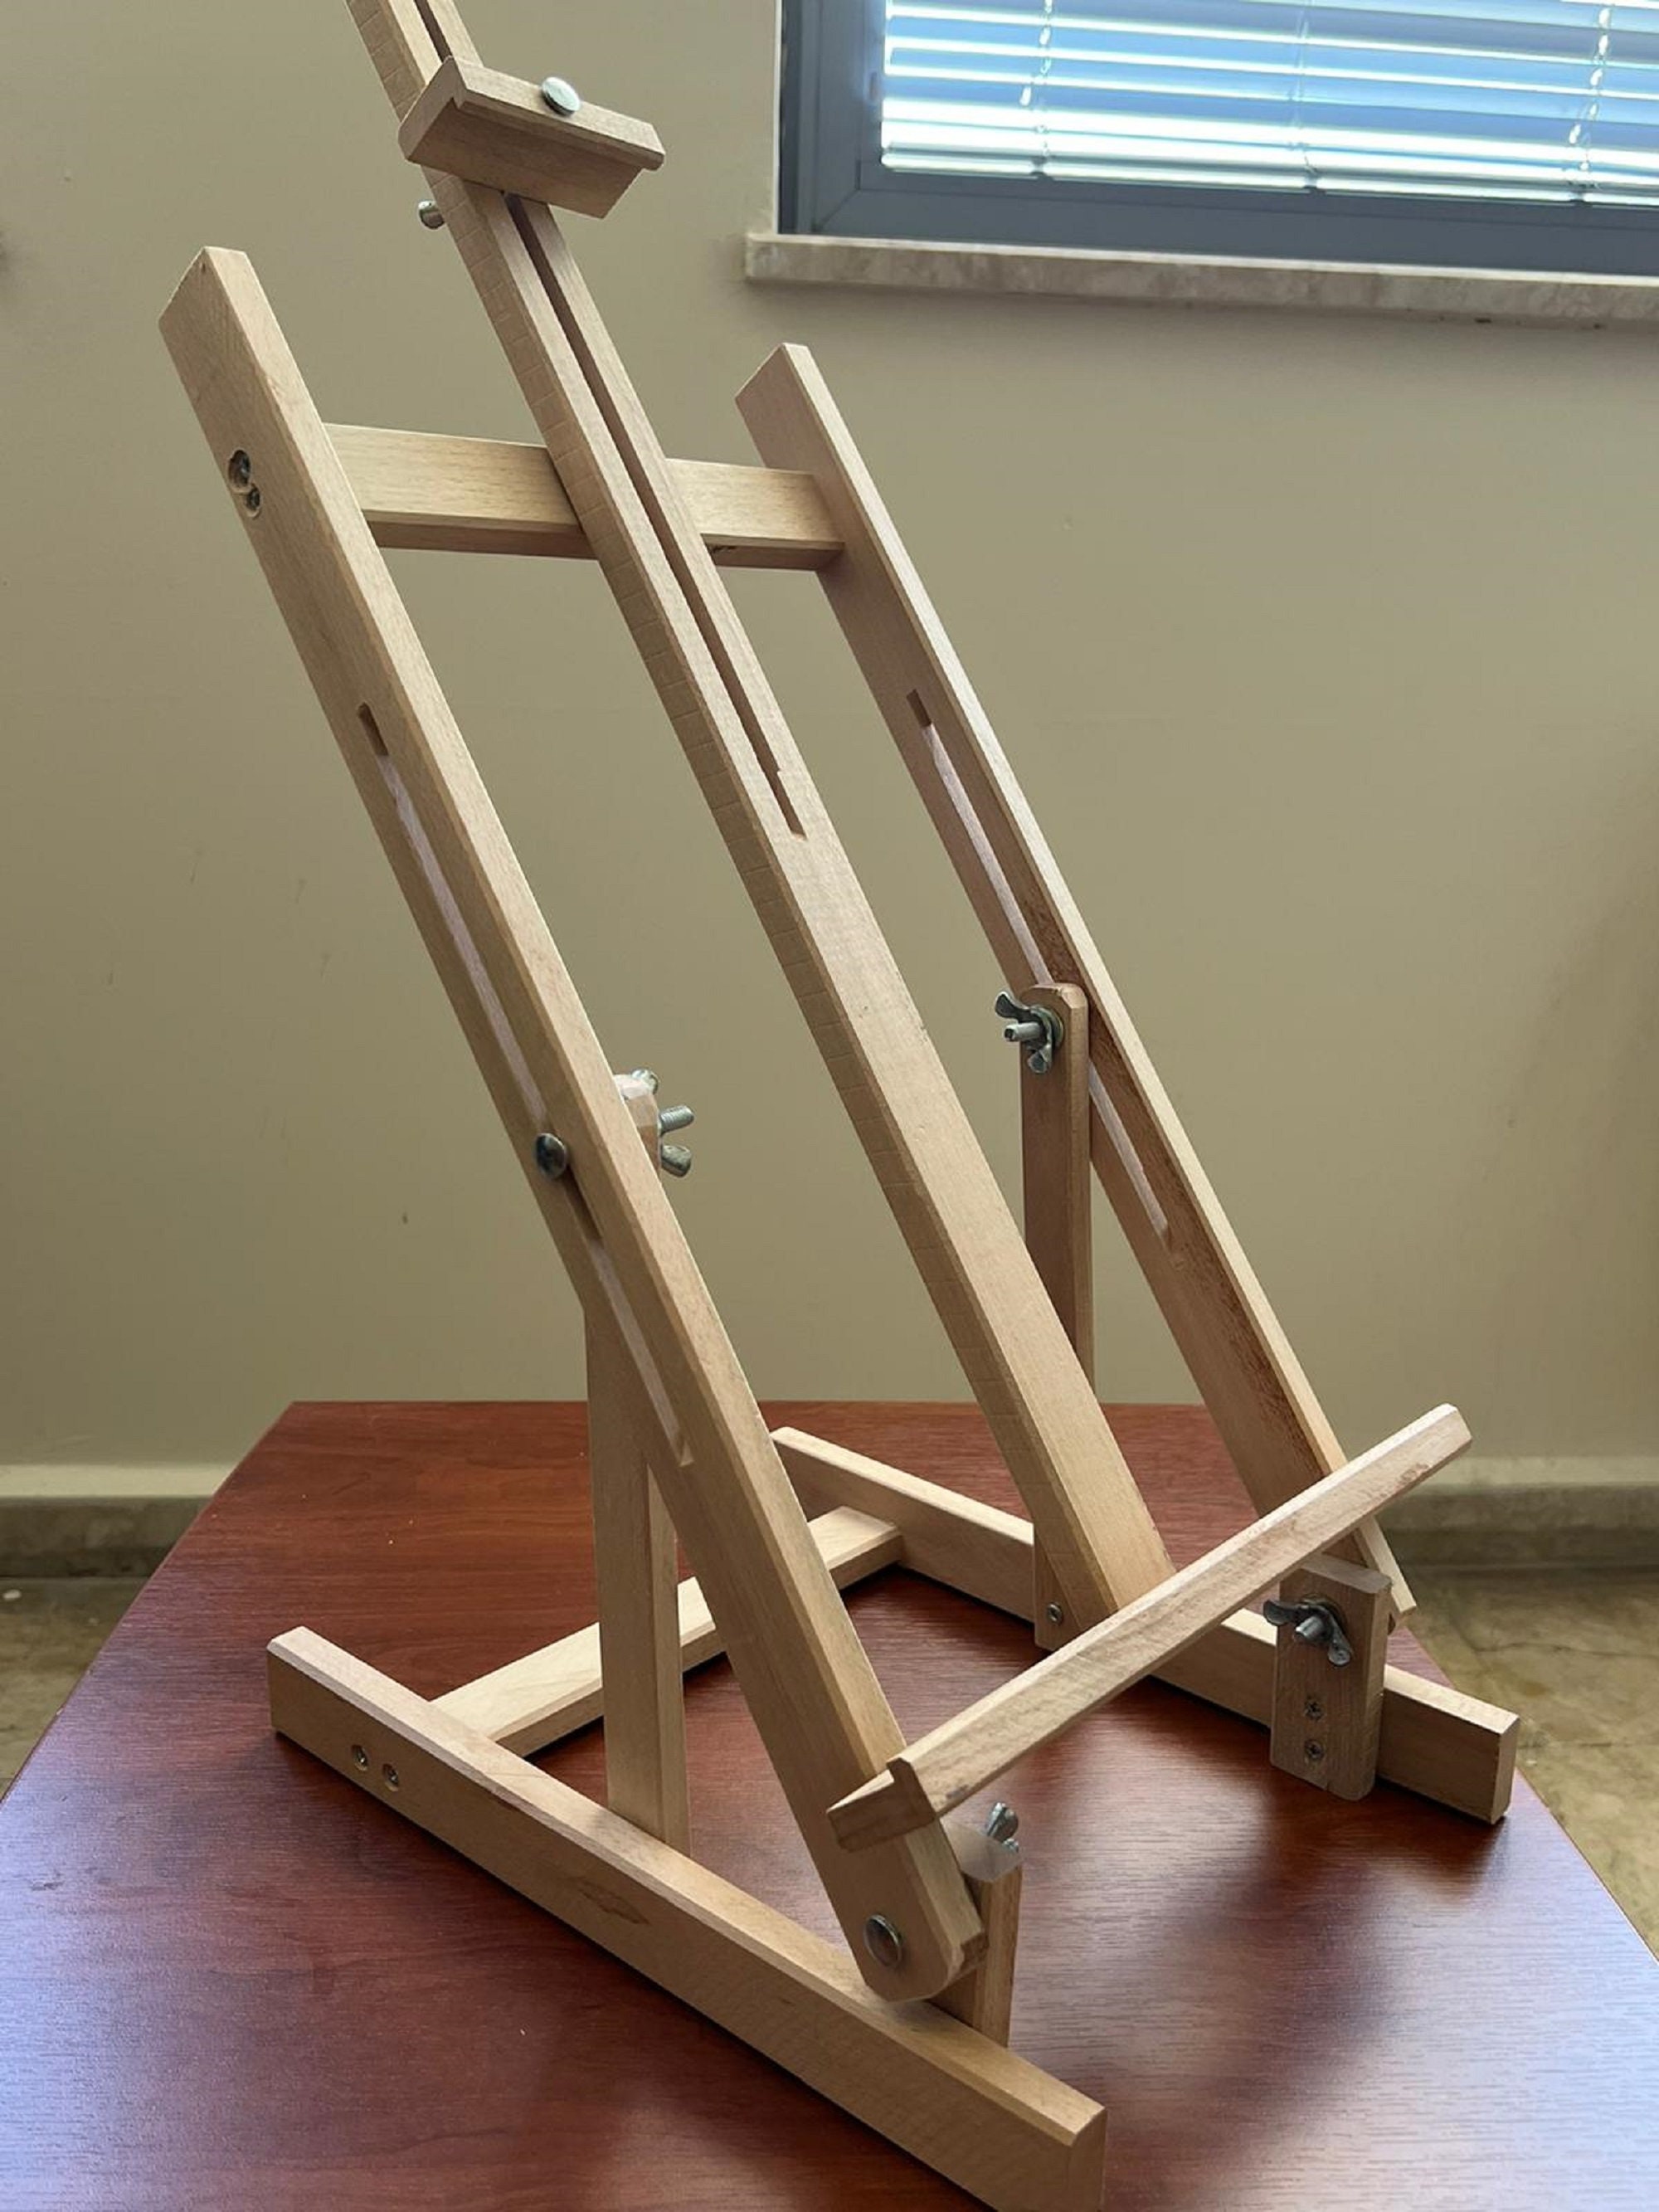 Hornbeam Wood Tabletop Easel, Adjustable, for Kids and Adults 